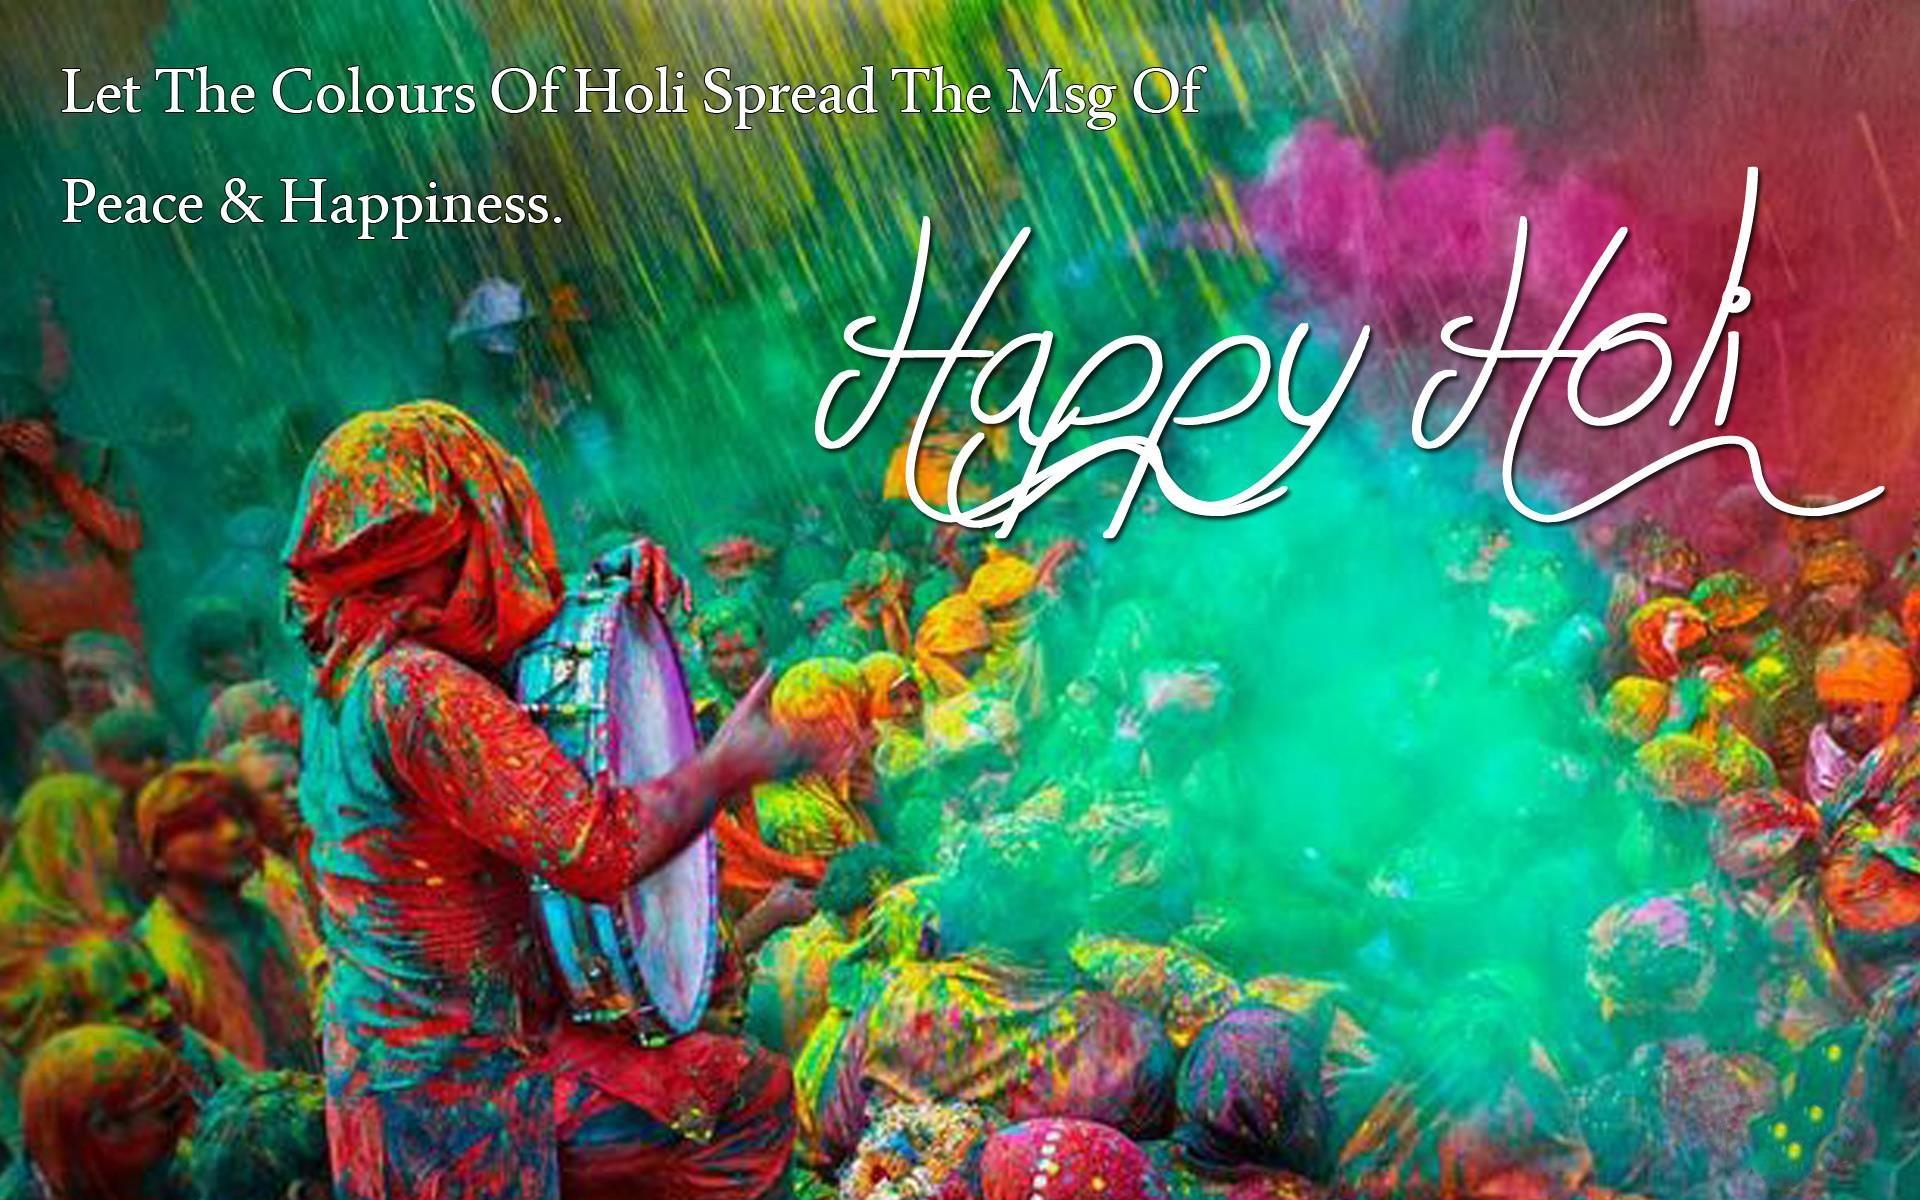 Happy Holi 2020 Image, Quotes, Wishes, Greetings, Messages, Shayari and Whatsapp Status